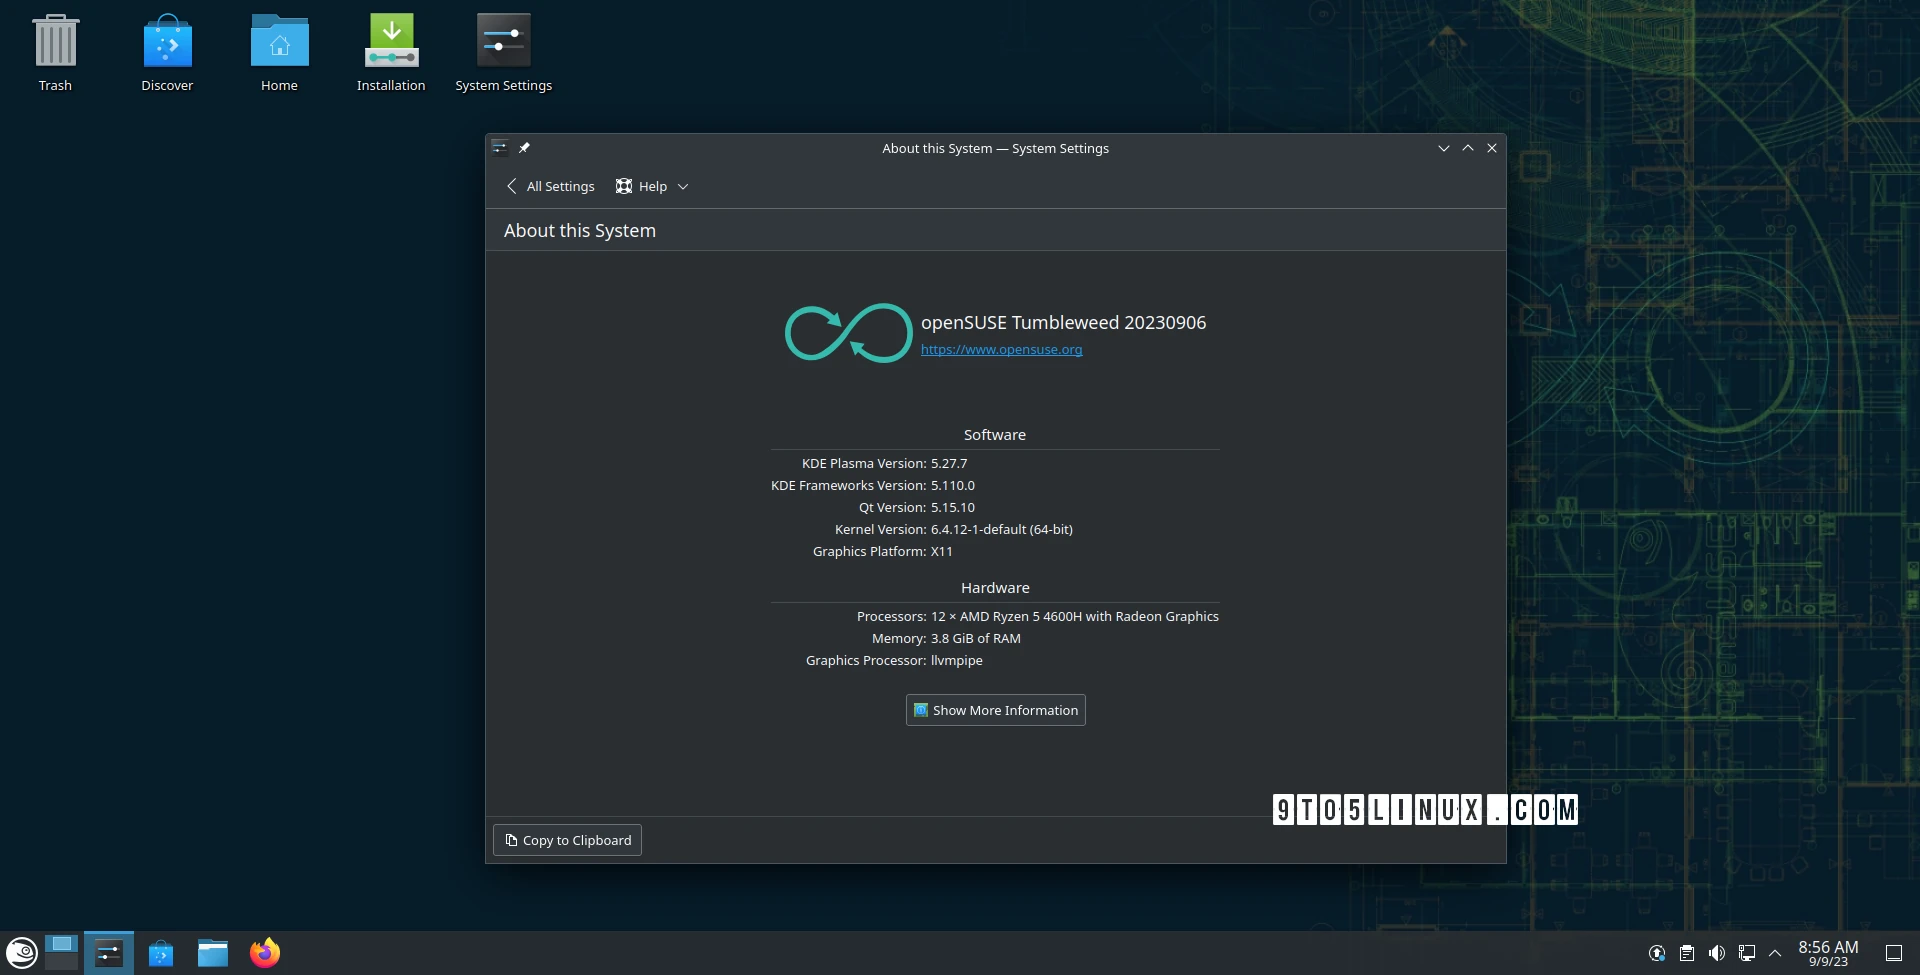 KDE Frameworks 5.110 Adds Support for the QOI Image Format to All KDE Apps